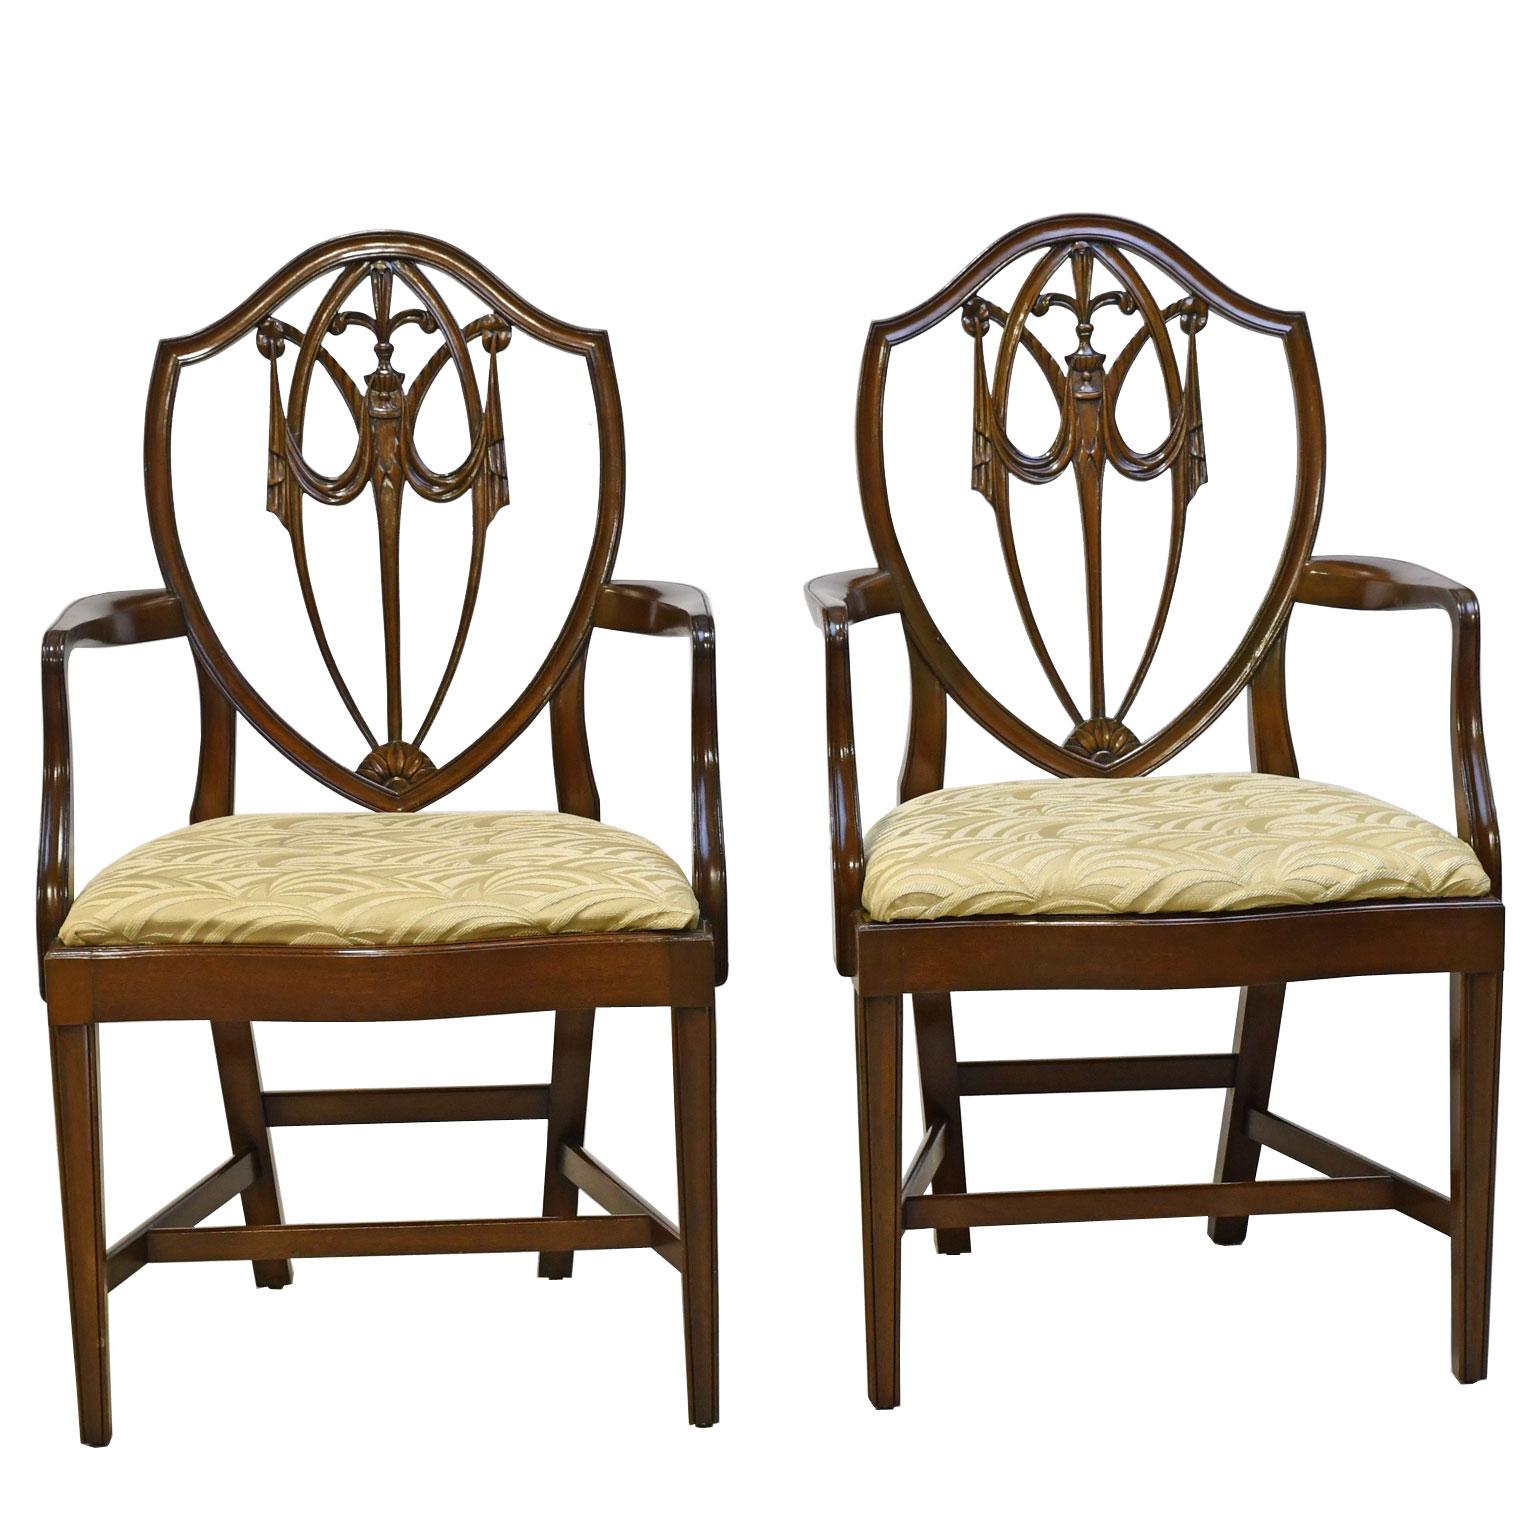 A beautiful set of twelve (12) American dining chairs in solid mahogany comprising of two armchairs and ten side chairs in the Hepplewhite-style with a shield-back with carved fleur-de-lis and swags on the pierced back, and a serpentine front with